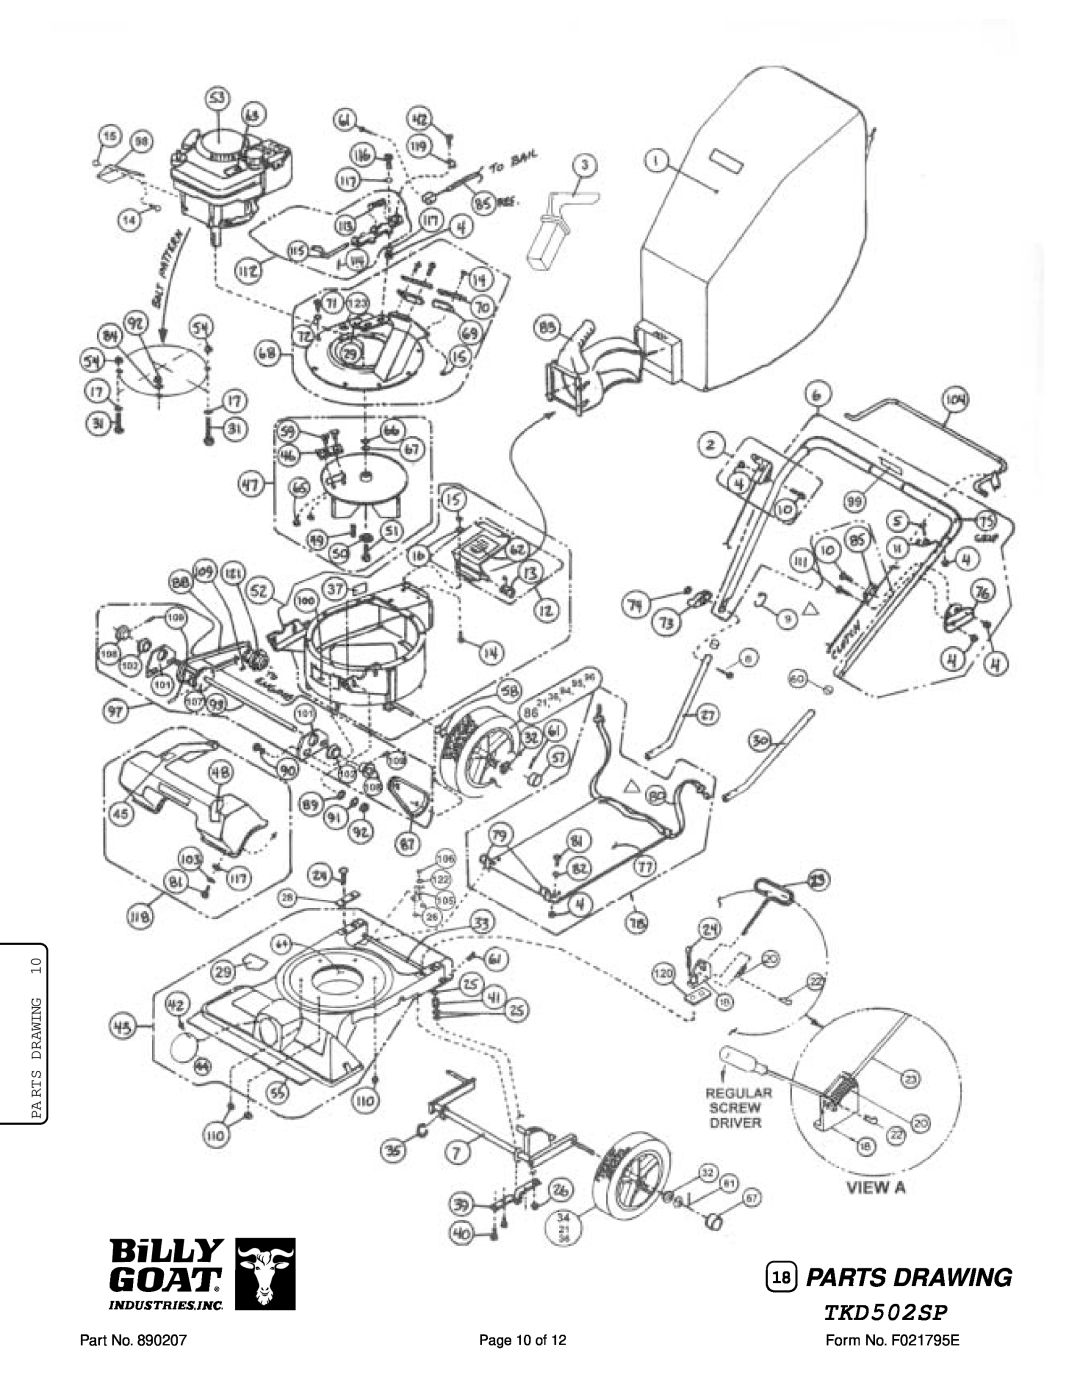 Billy Goat TKD502SP specifications Parts Drawing 